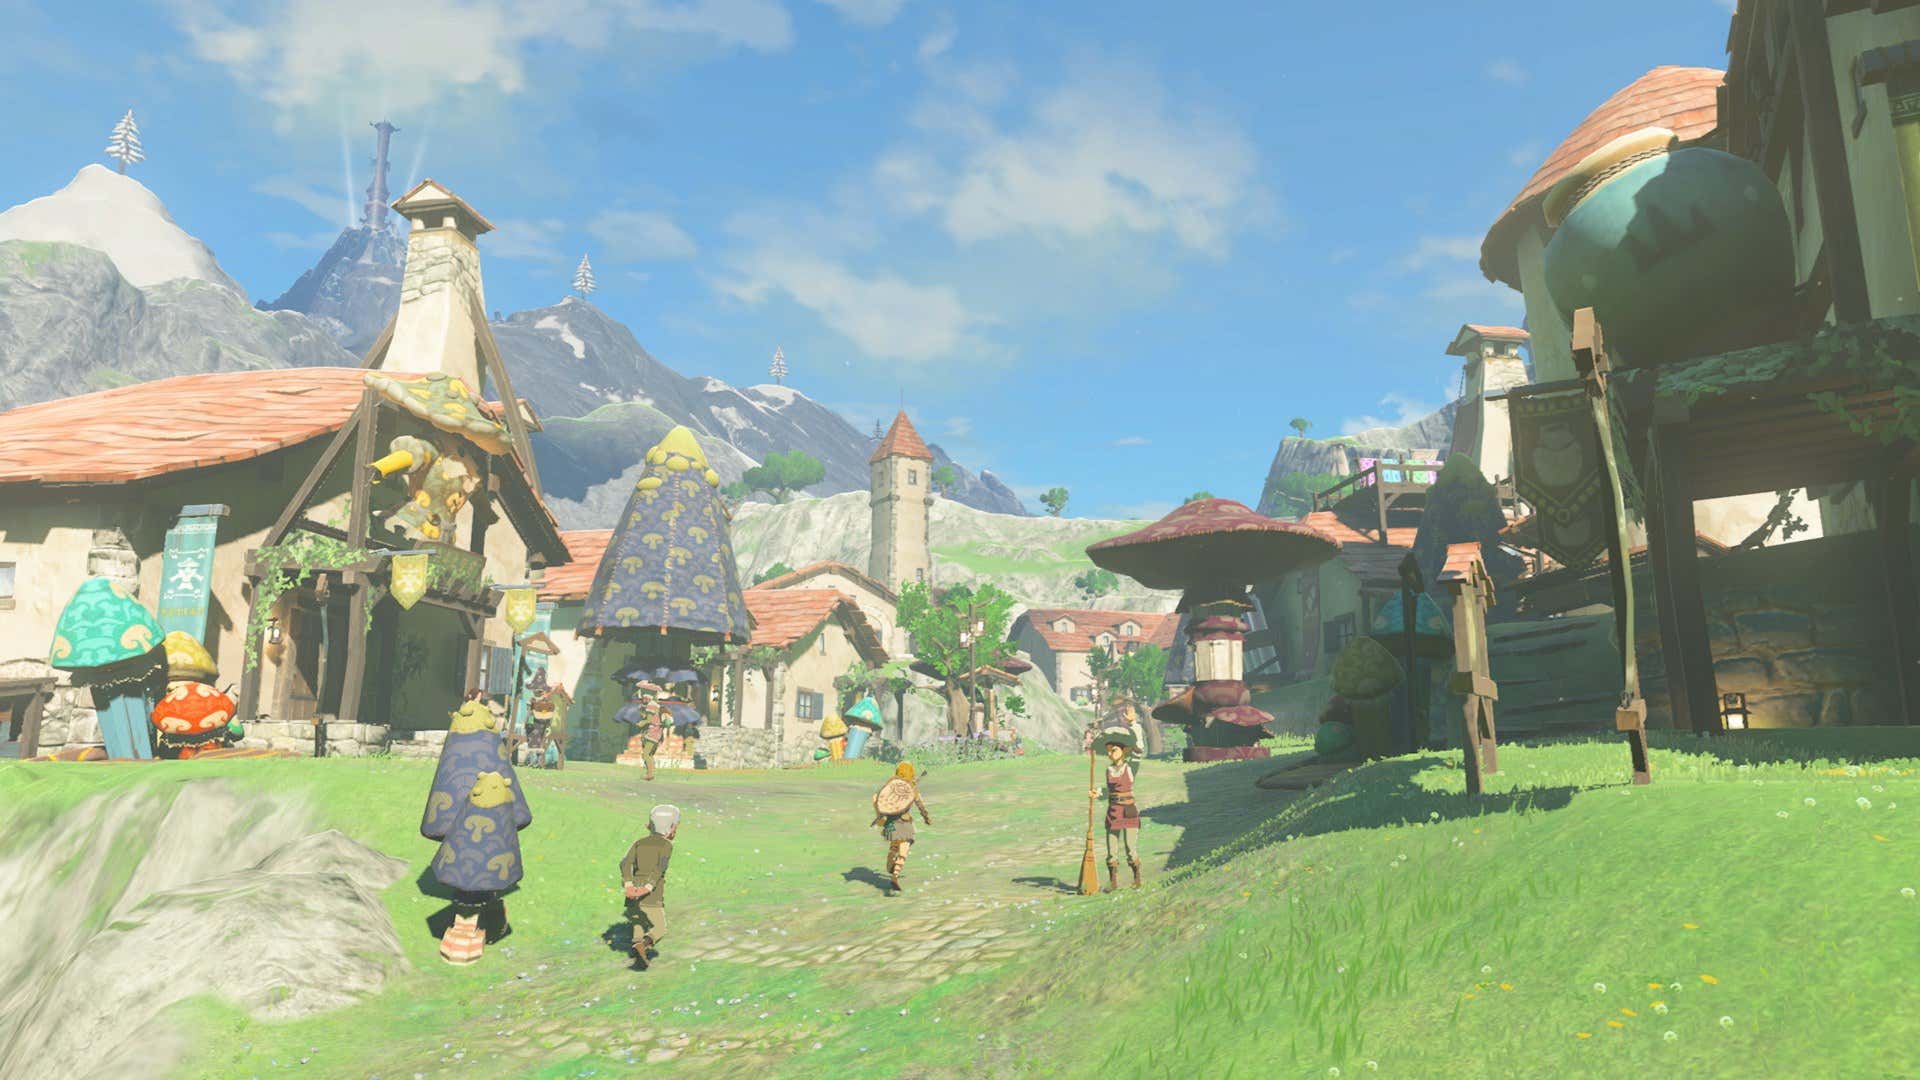 Link explores a colorful village in Tears of the Kingdom